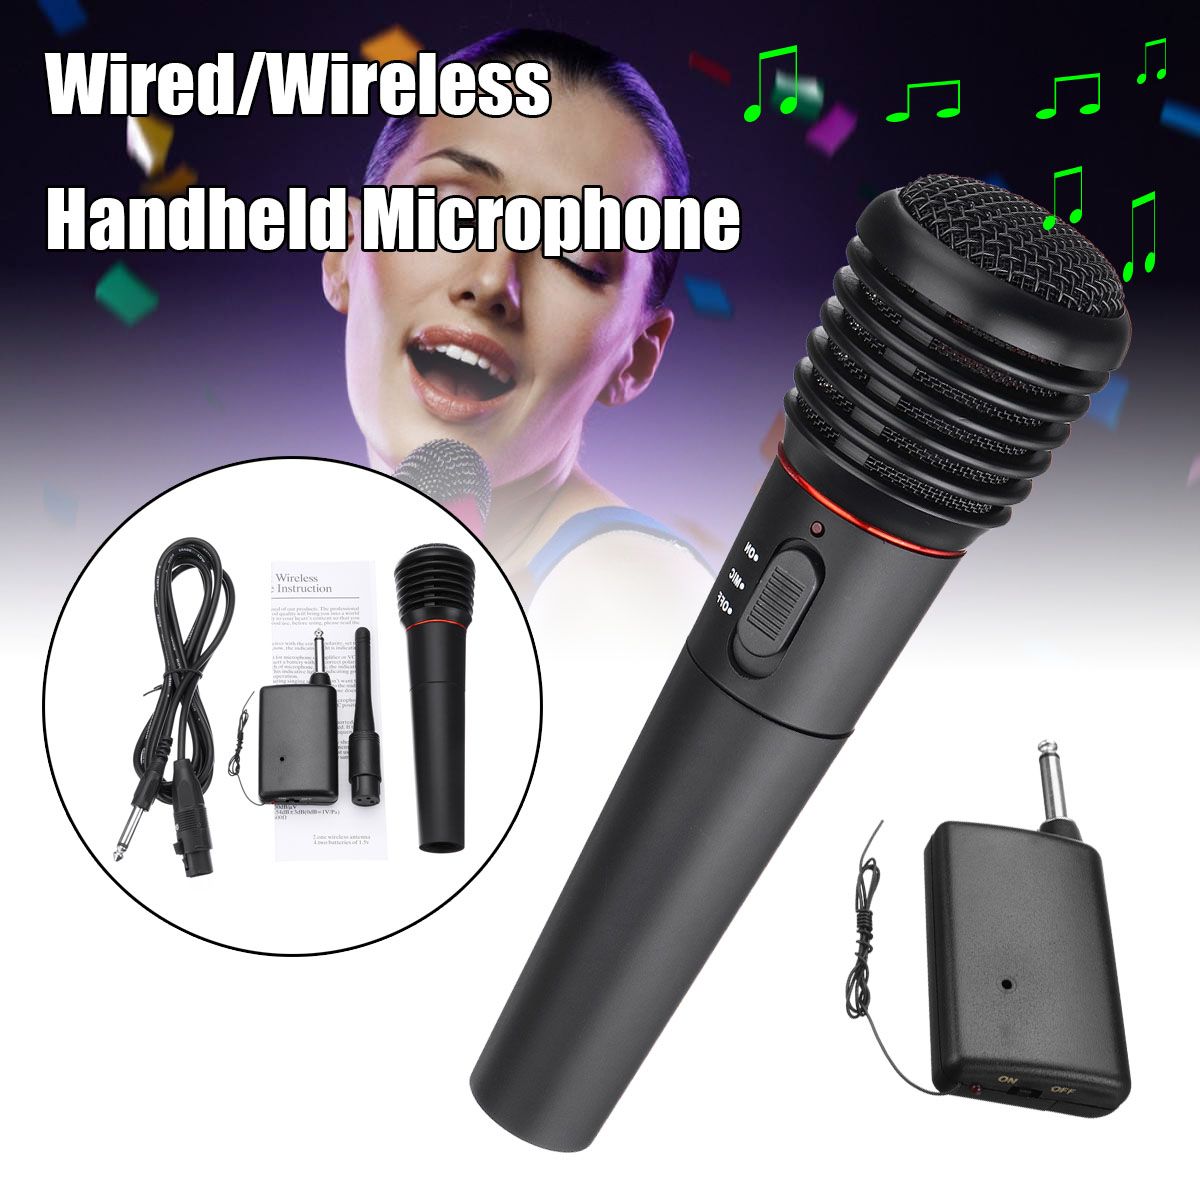 2In1-Professional-Wired-Wireless-Handheld-Microphone-Mic-Dynamic-Cordless-for-KTV-Karaoke-Recording-1518191